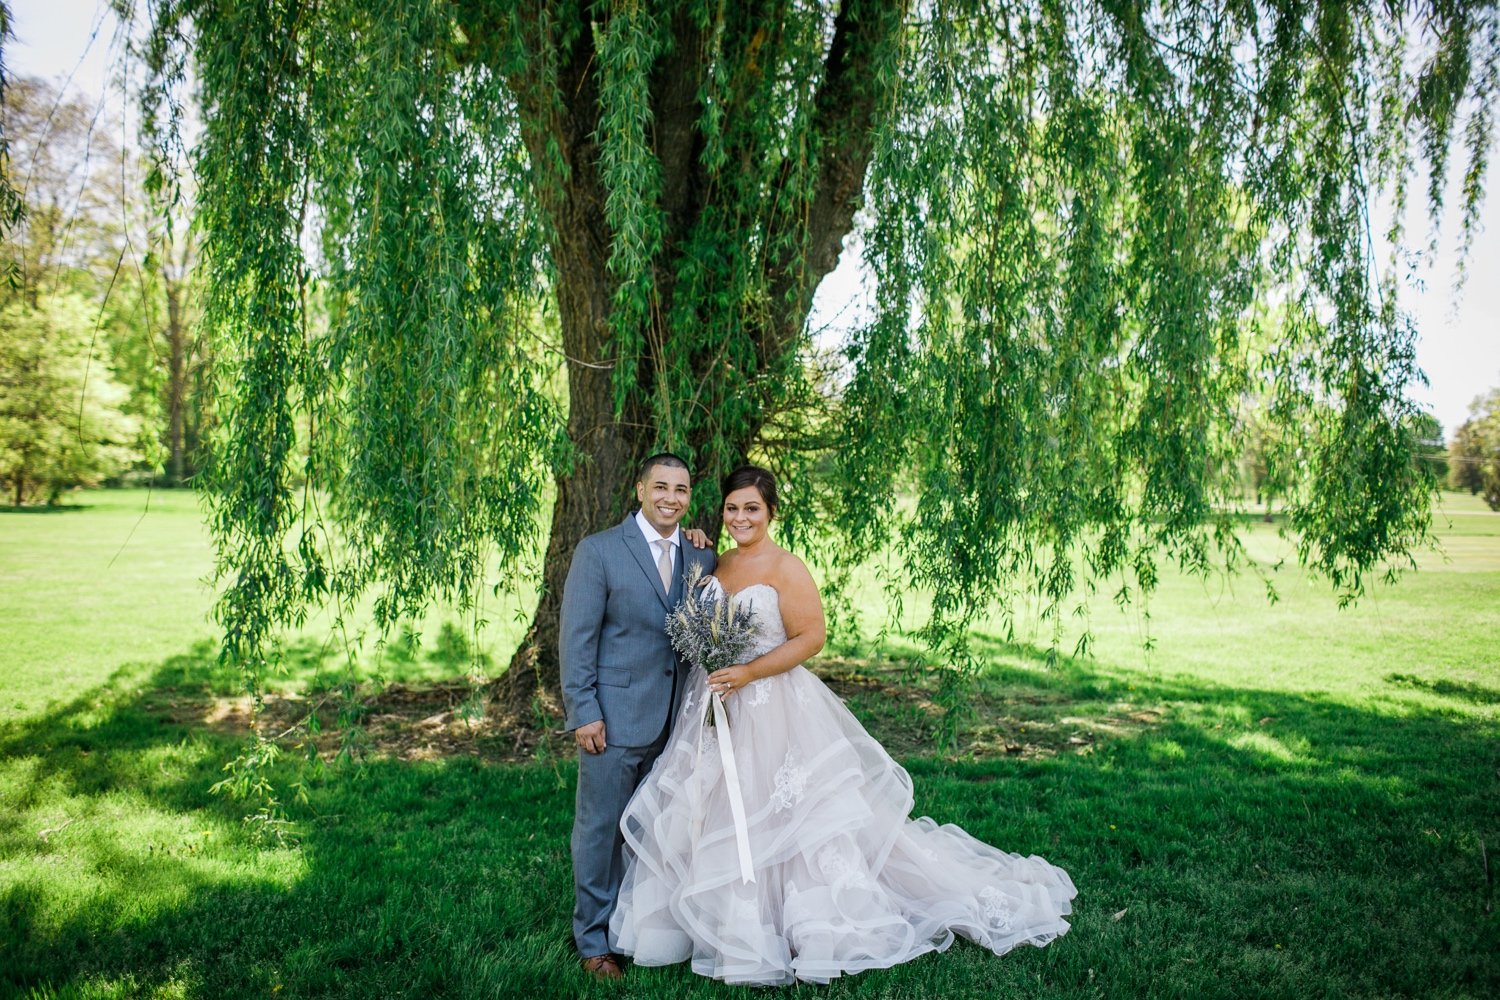 09_Wedding couple portraits at Otterkill Golf and Country Club by Sweet Alice Photography.jpg